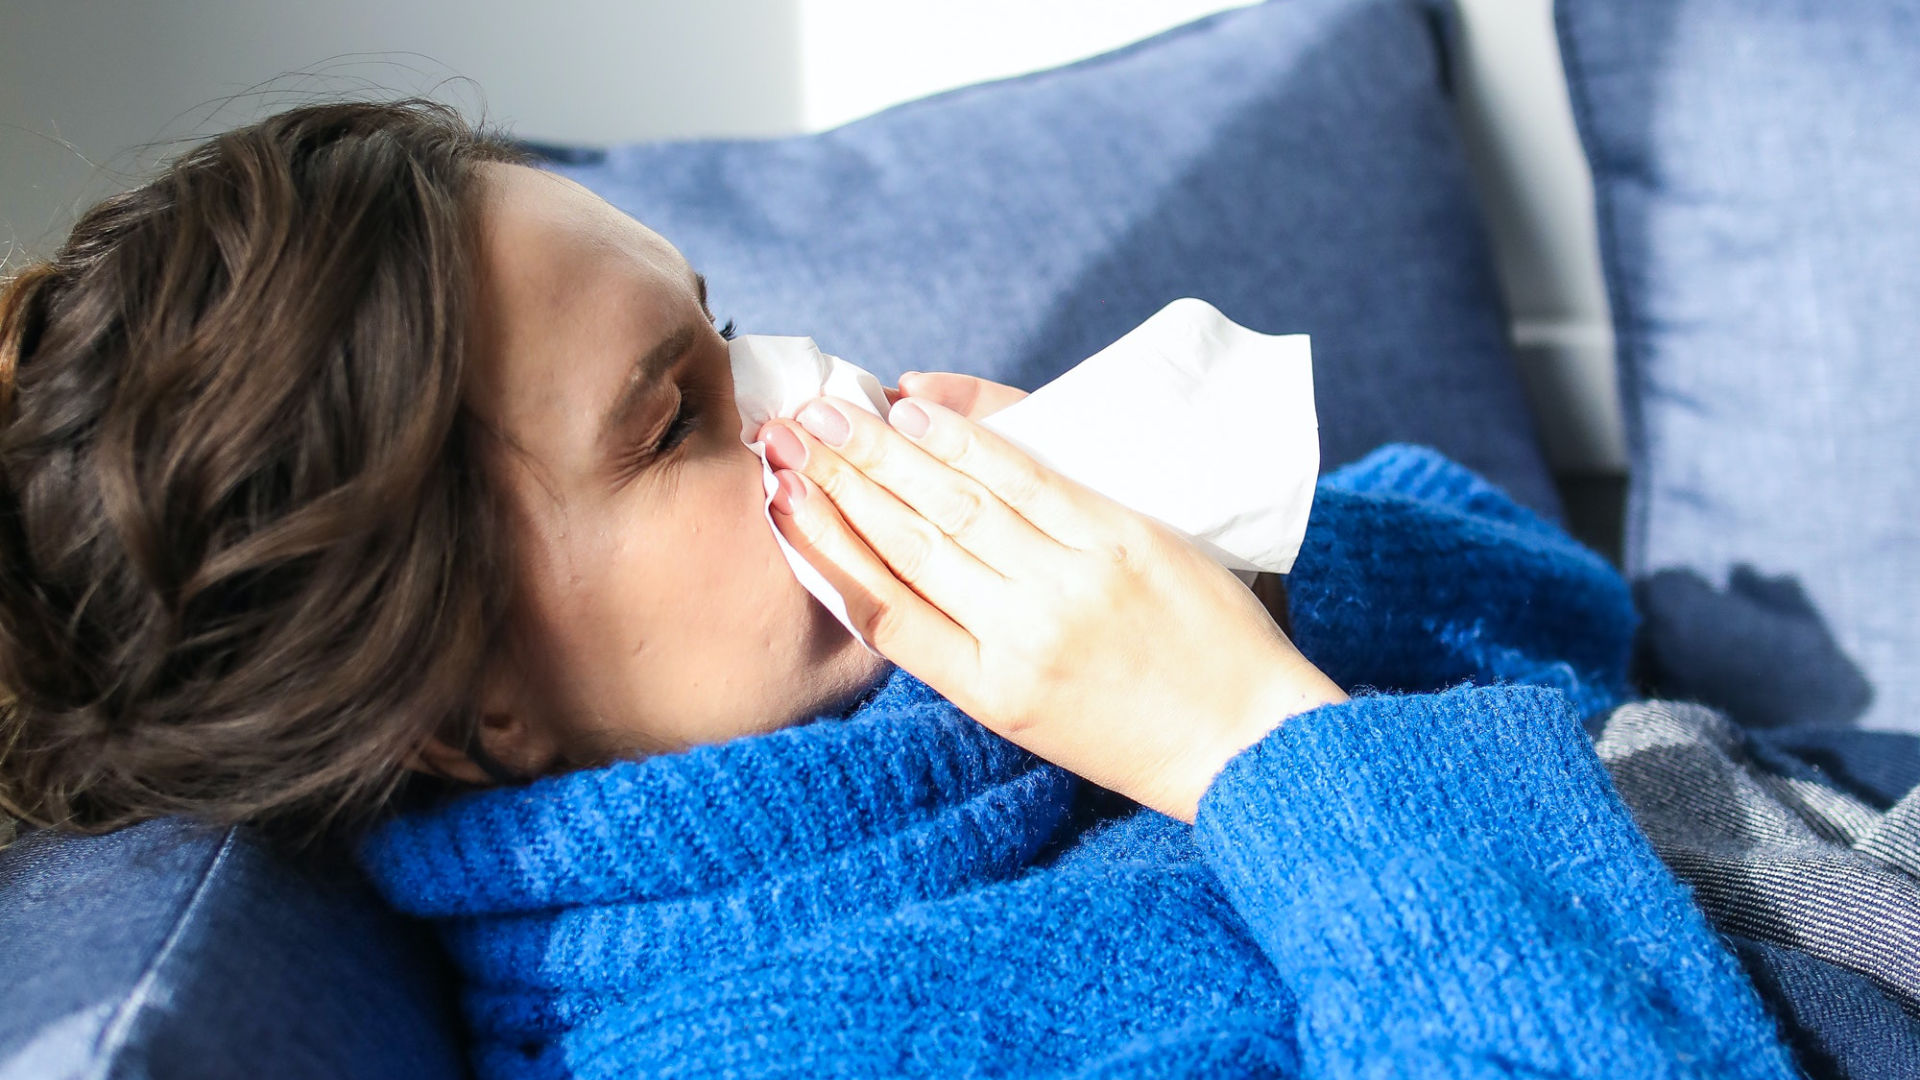 Yes, there is a strong flu pandemic at the moment